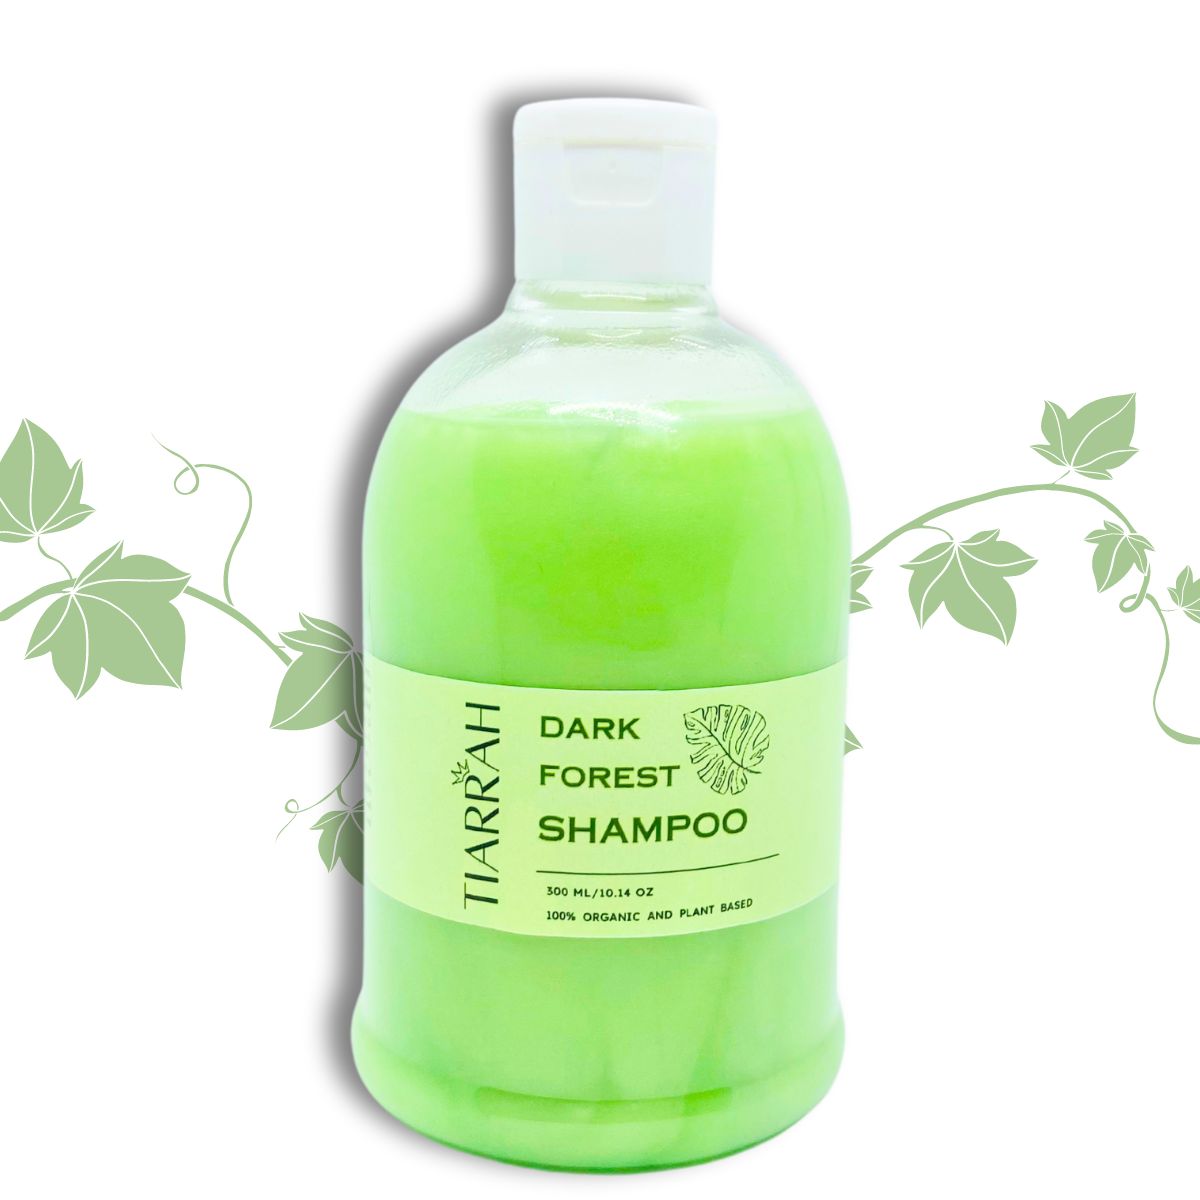 Tiarrah Dark Forest Shampoo: Natural, Organic, Non-Toxic - The Luxury Bath and Body Care Shop